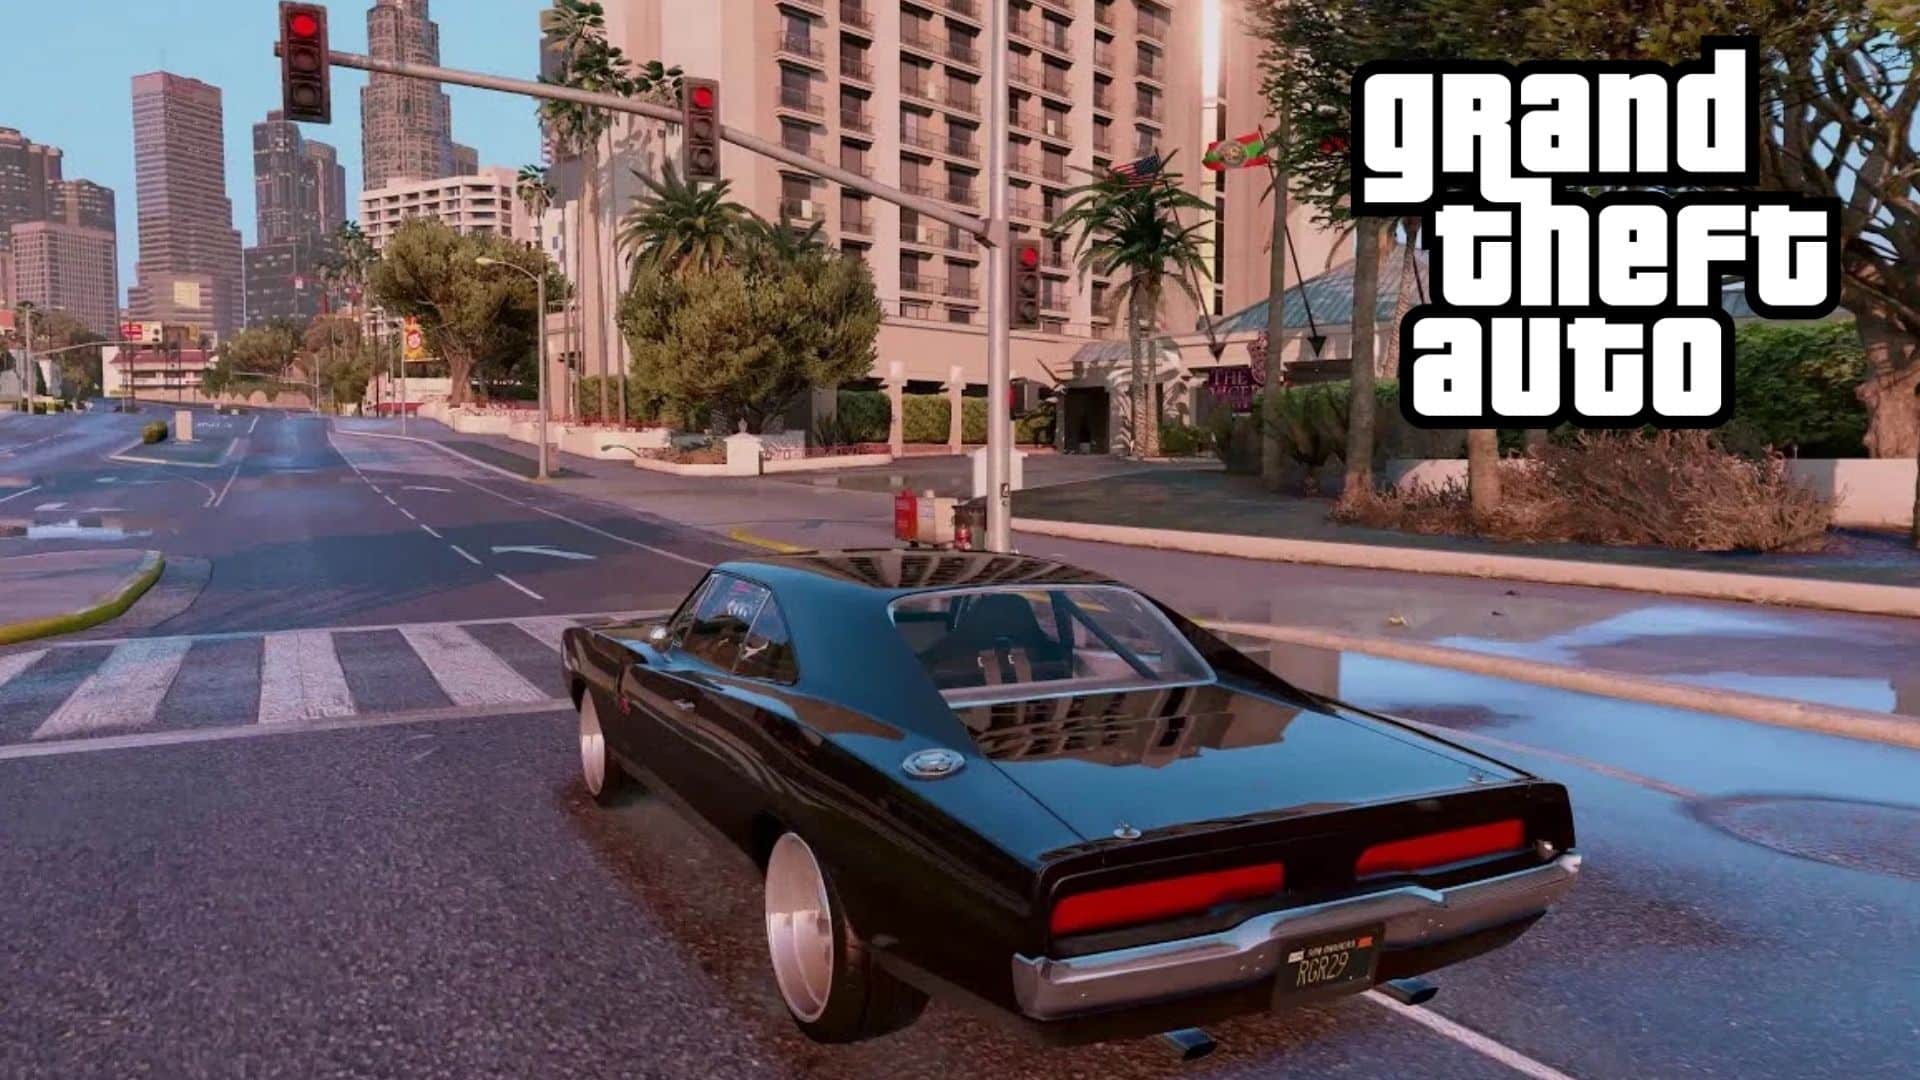 Full Quality] All GTA 6 LEAKED GAMEPLAY FOOTAGE! ( Grand Theft